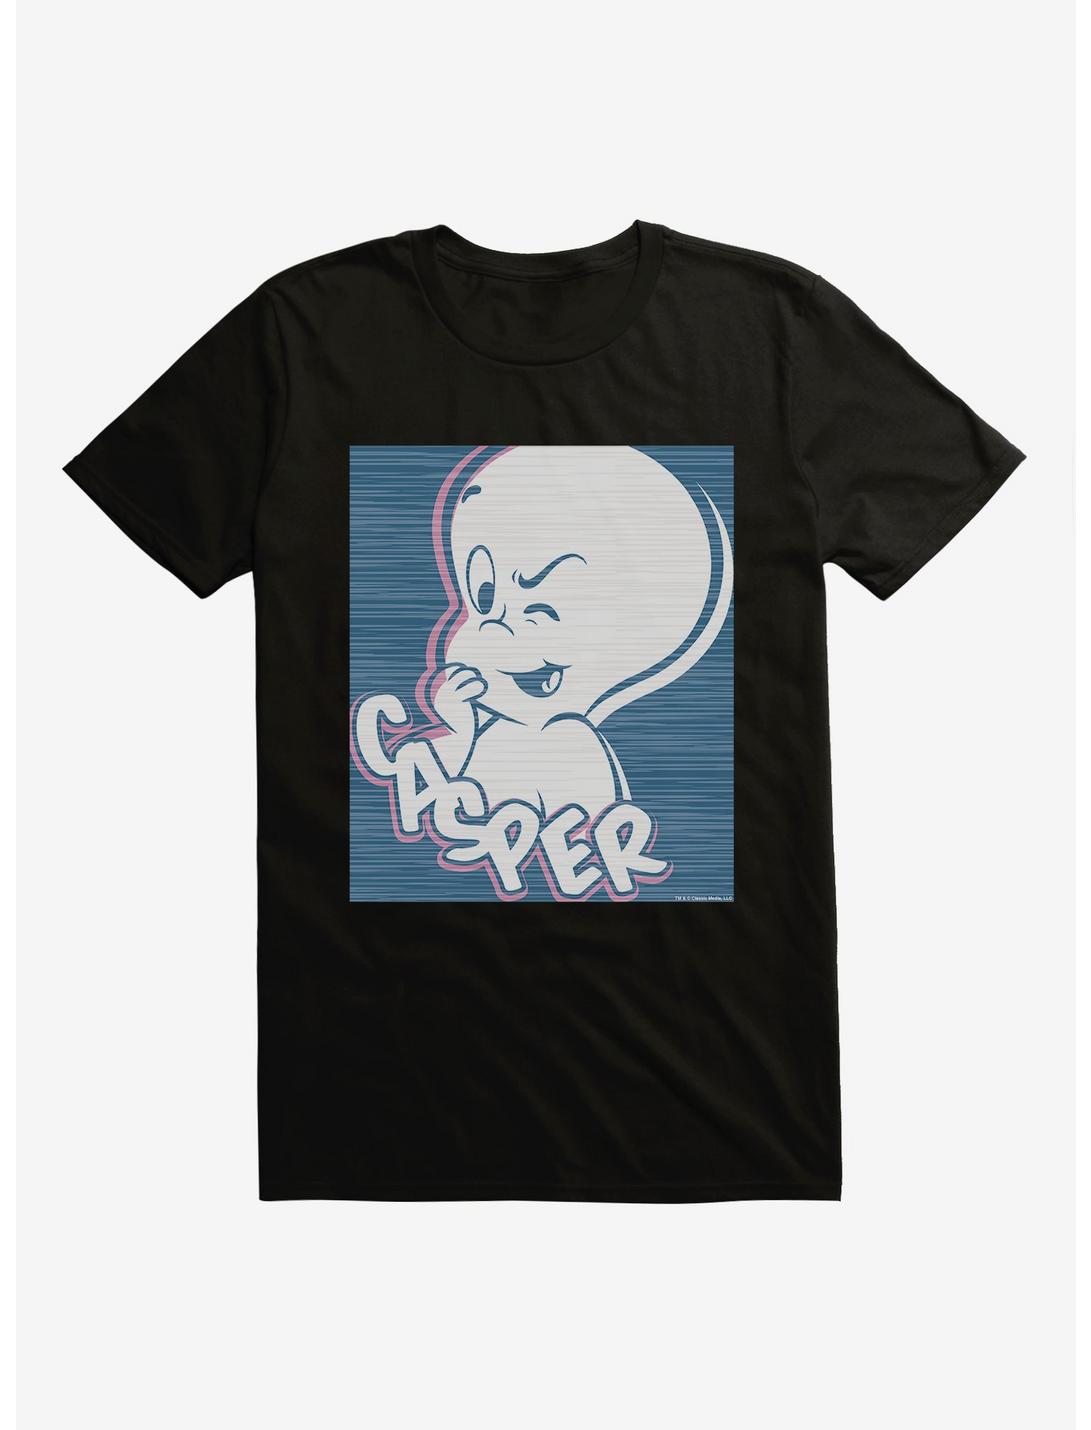 Casper The Friendly Ghost Up To Something T-Shirt, BLACK, hi-res